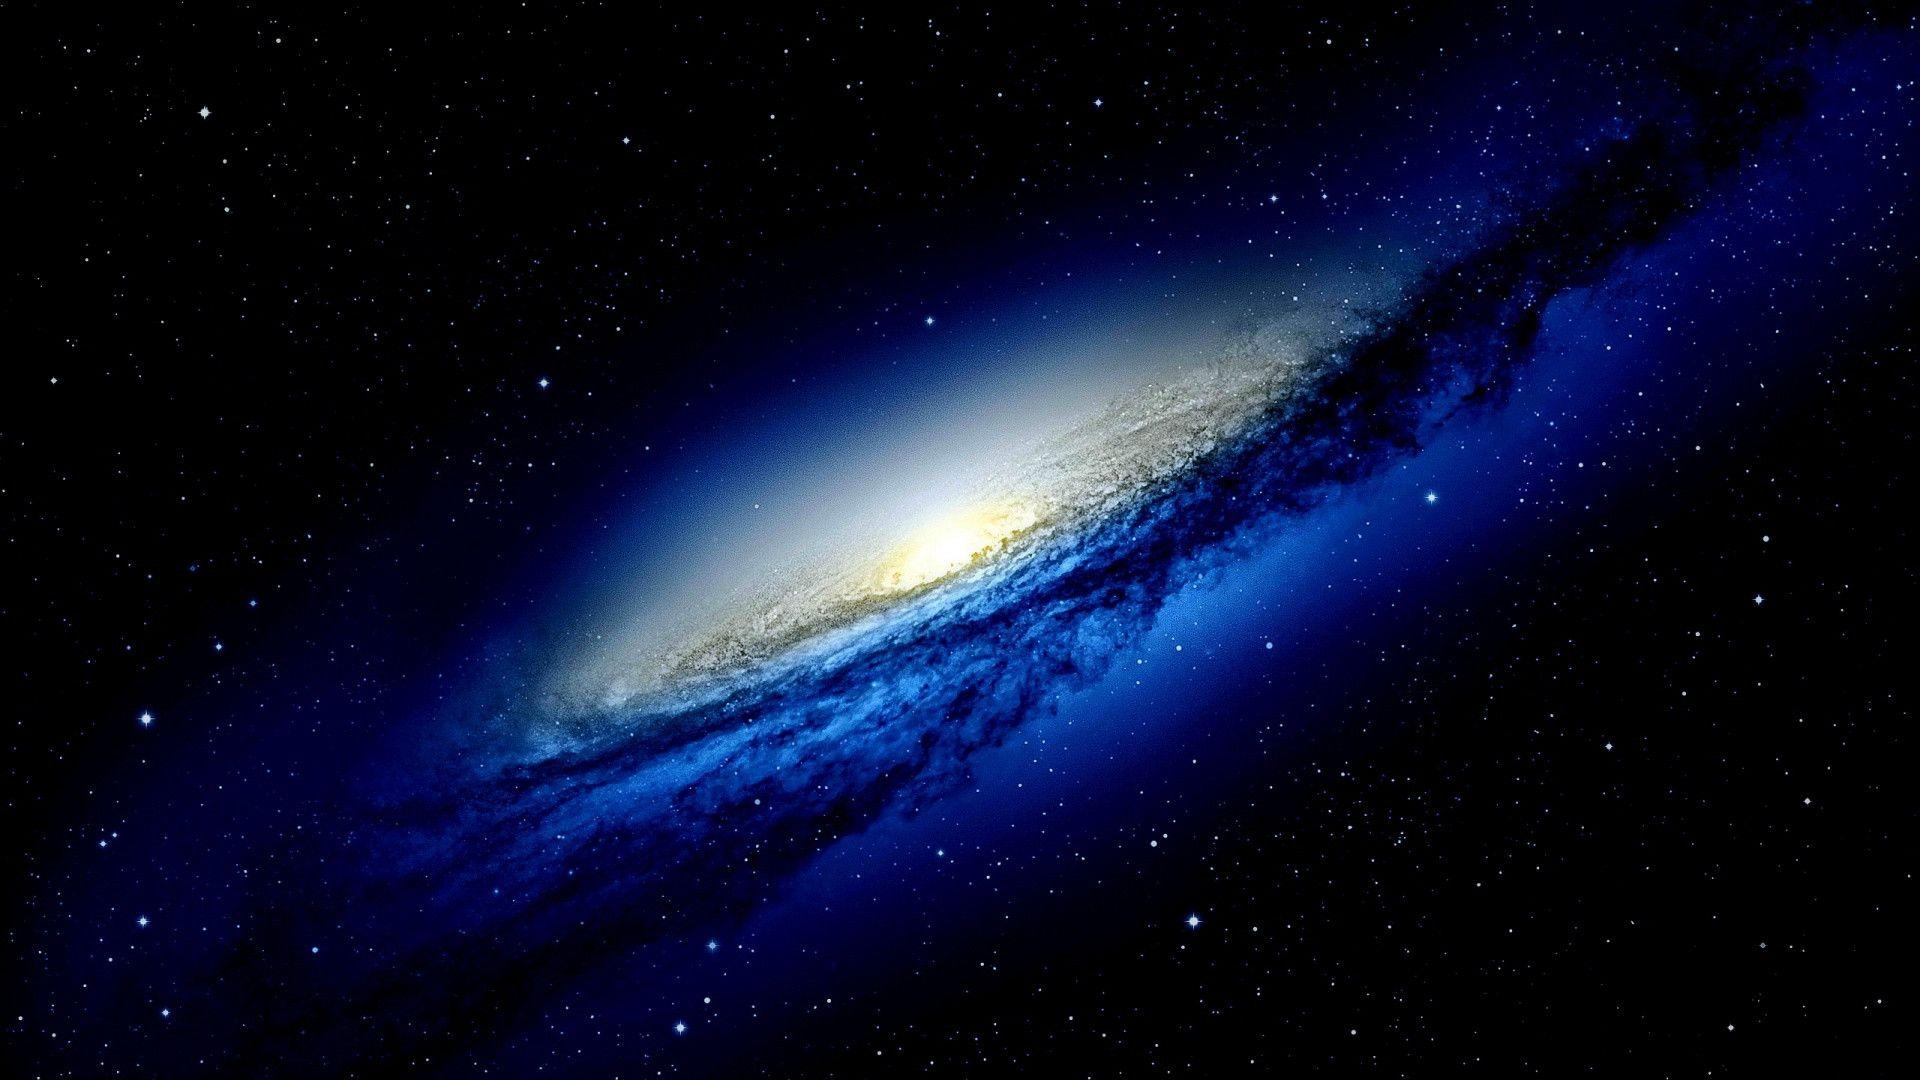 Wallpapers For > Hd Space Wallpapers 1920x1080